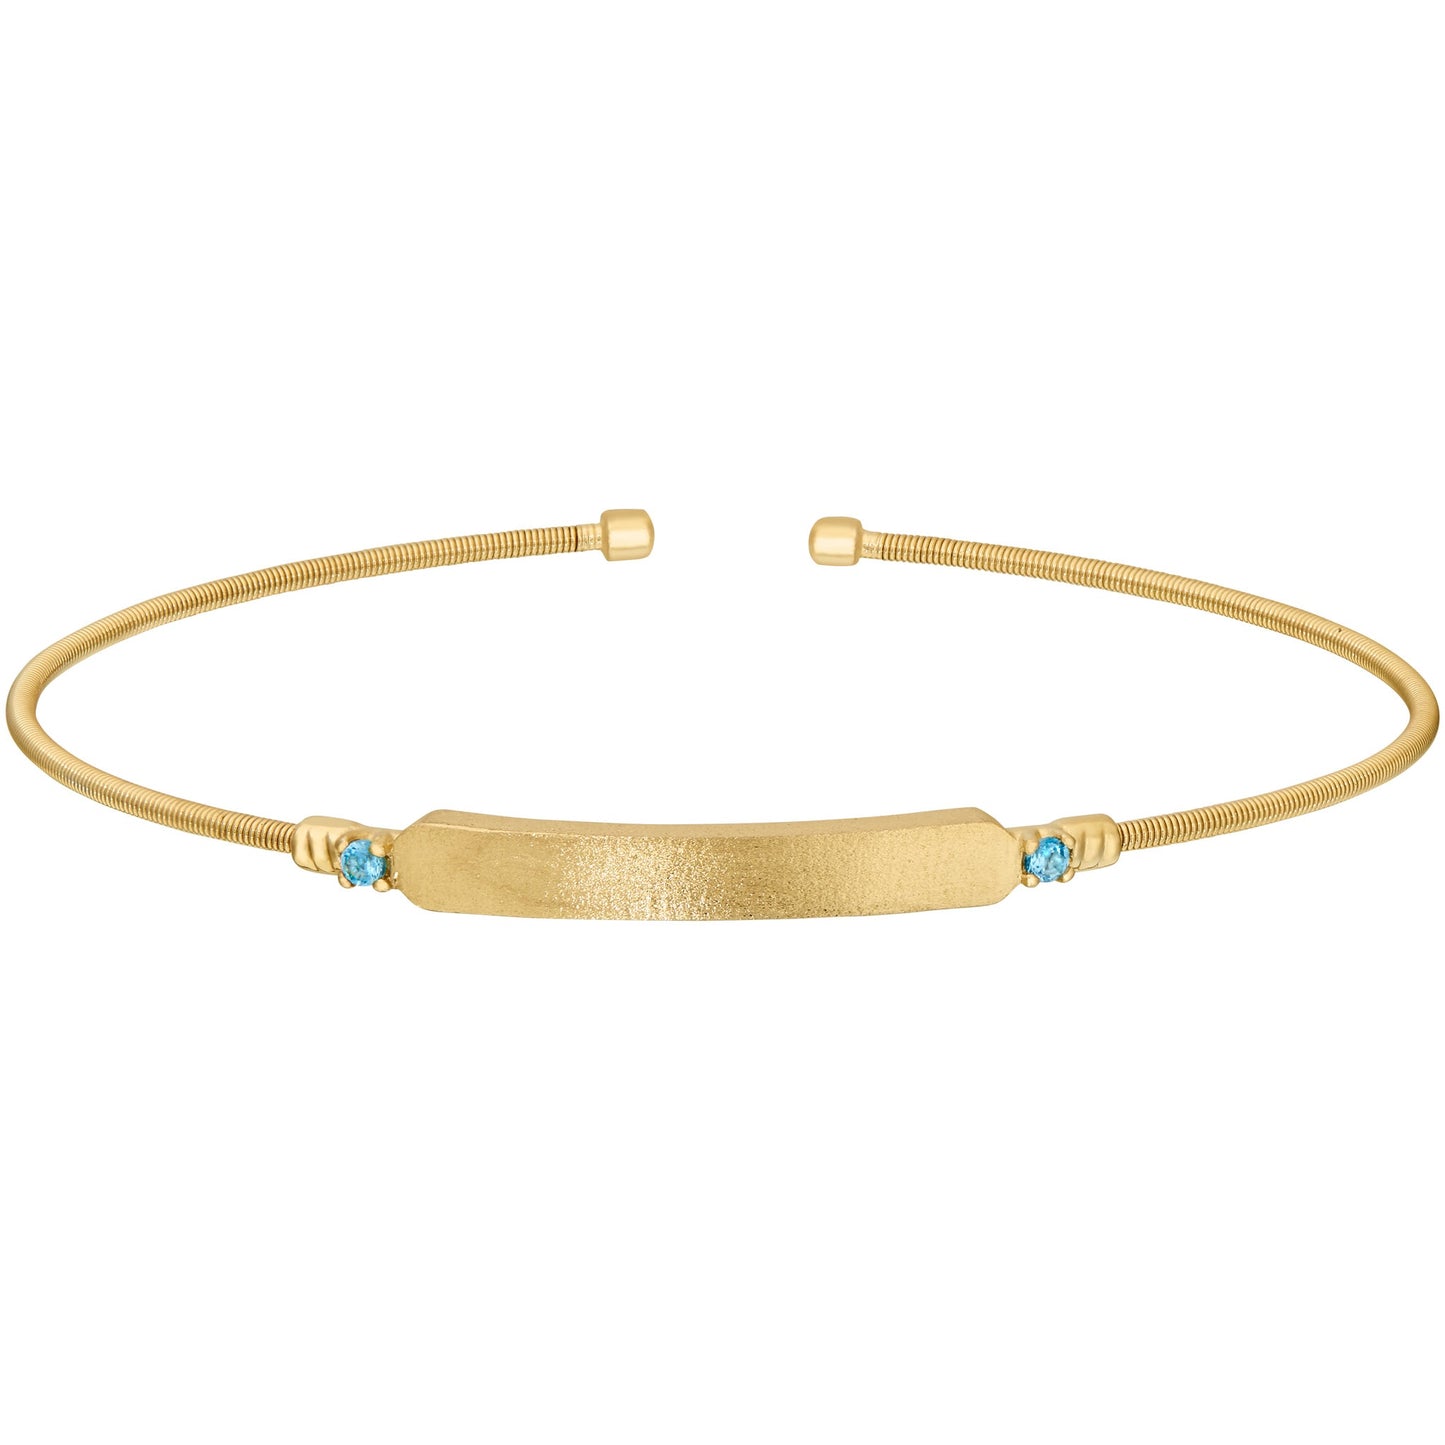 A engraveable flexible cable birthstone bracelet displayed on a neutral white background.